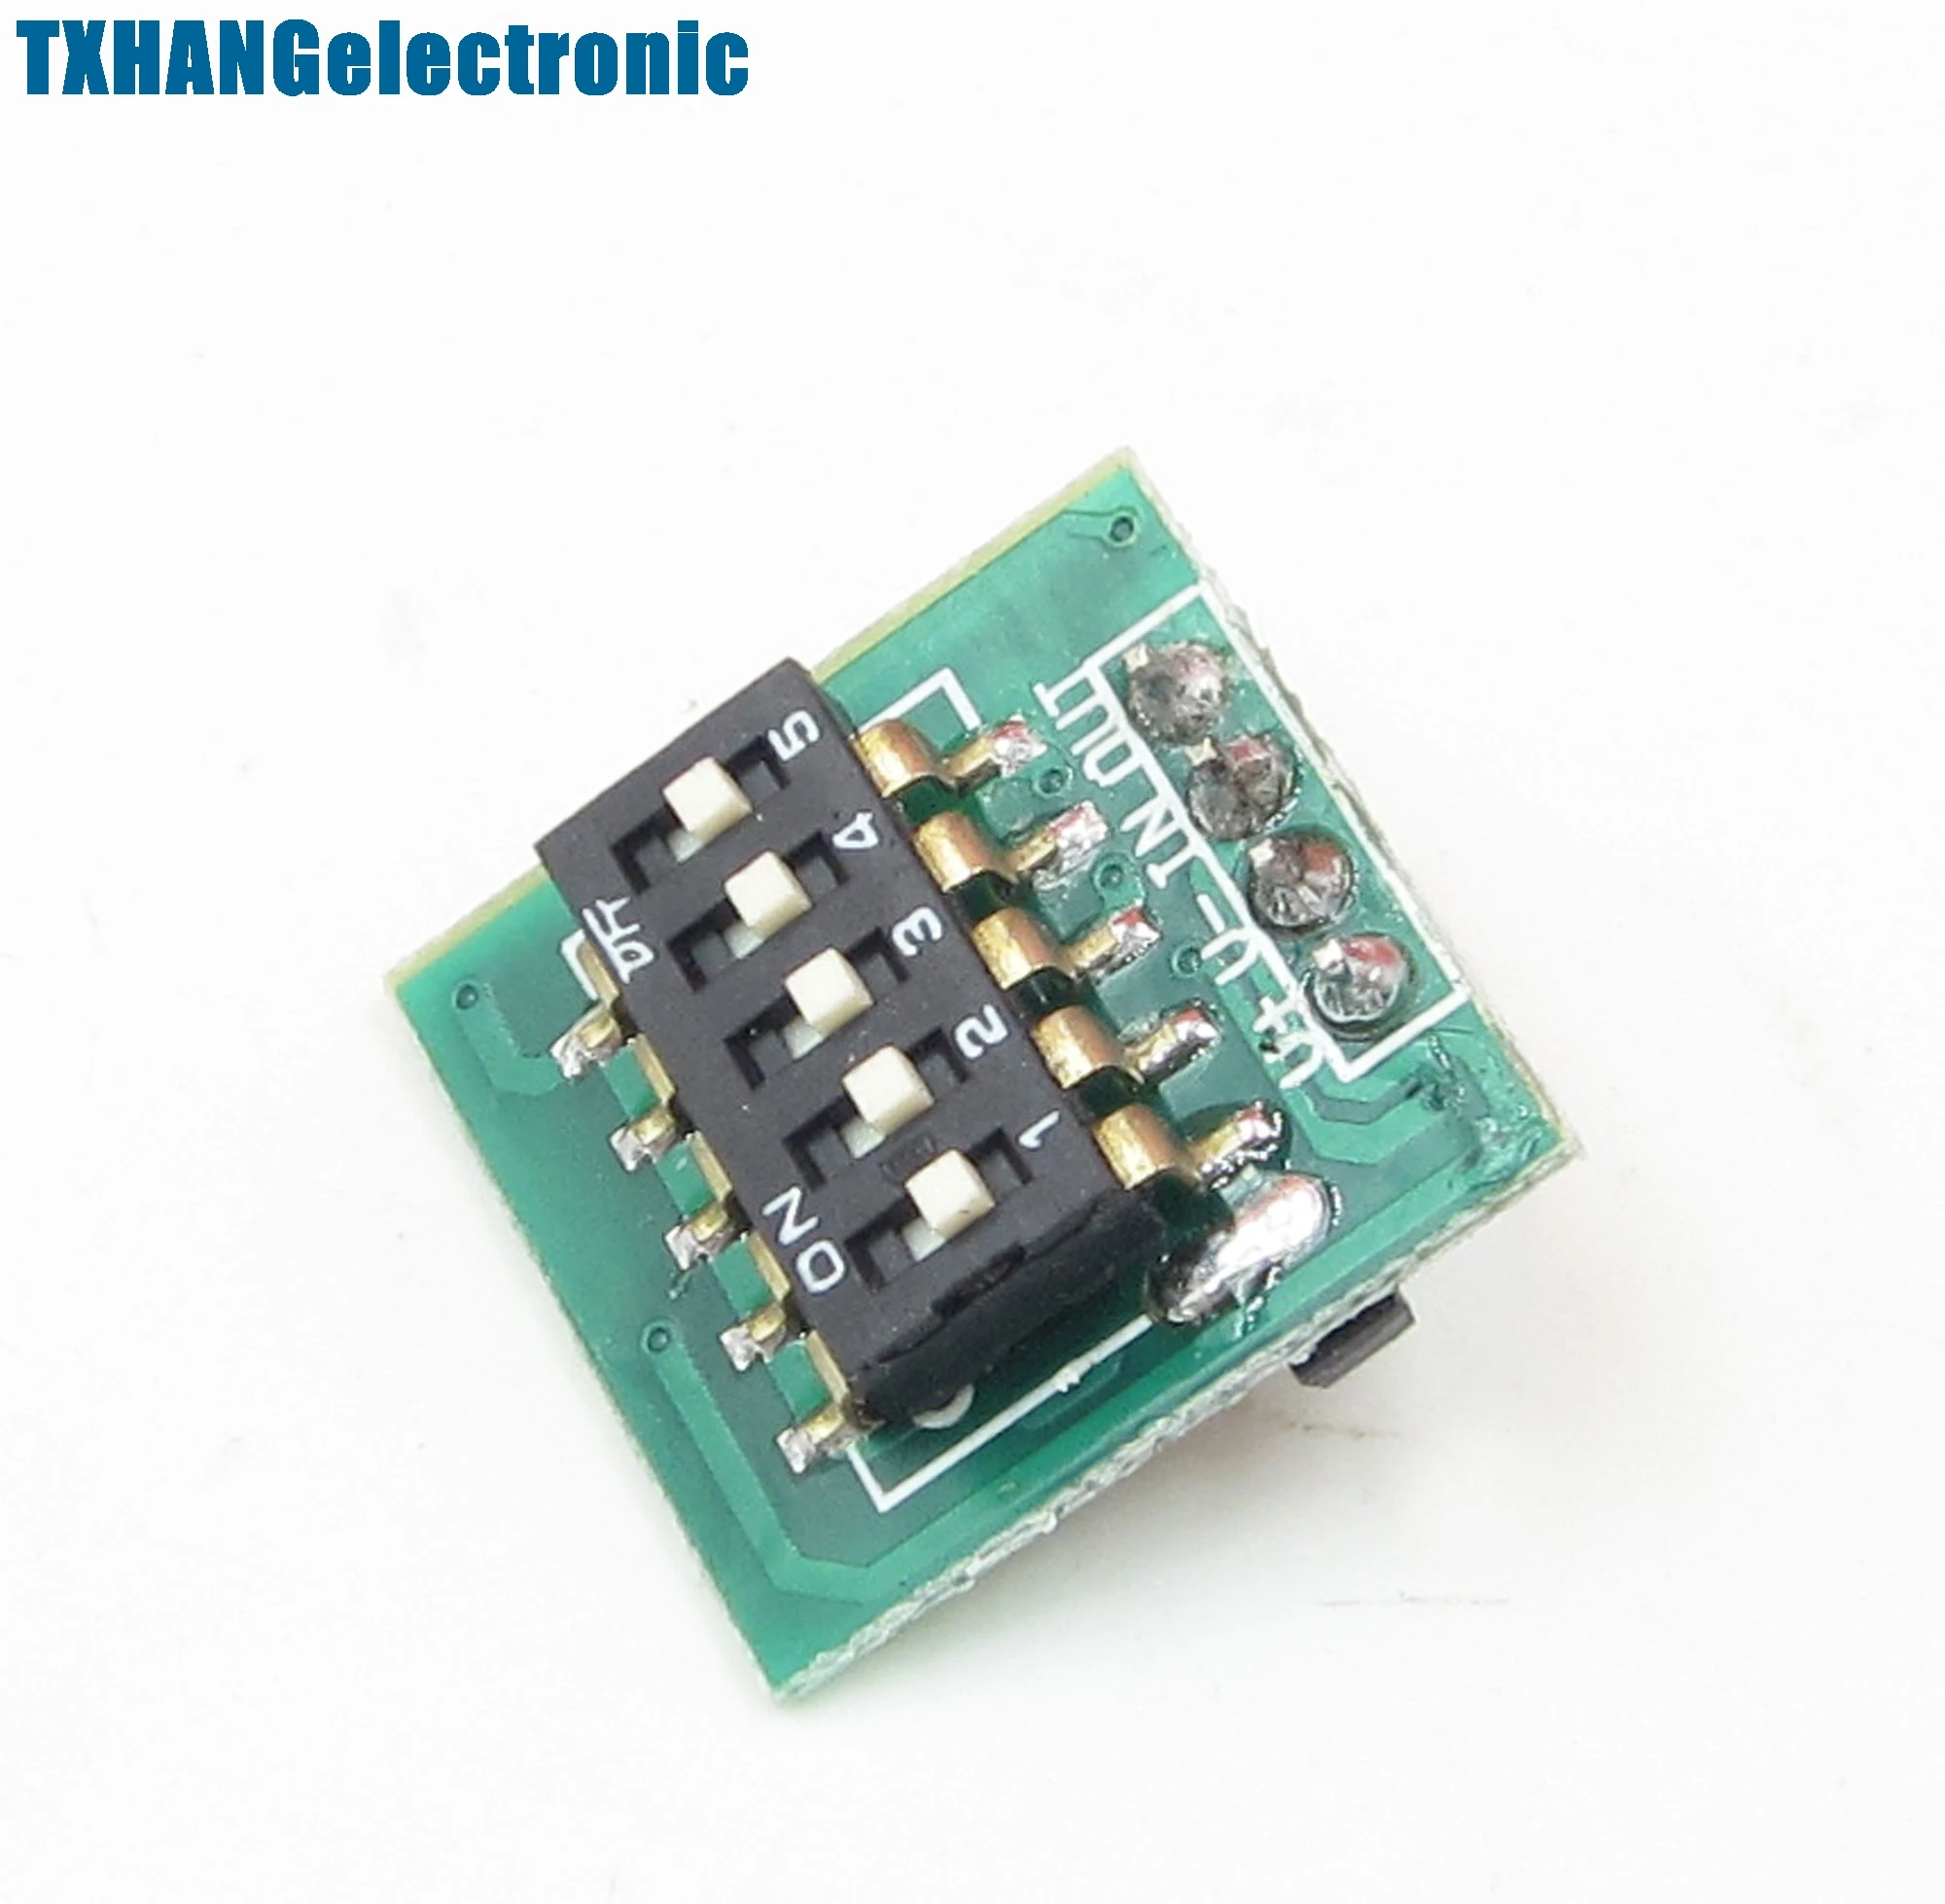 Timer Switch Controller Module 10S-24H Steady Adjustable Delay Module 3.3-18V